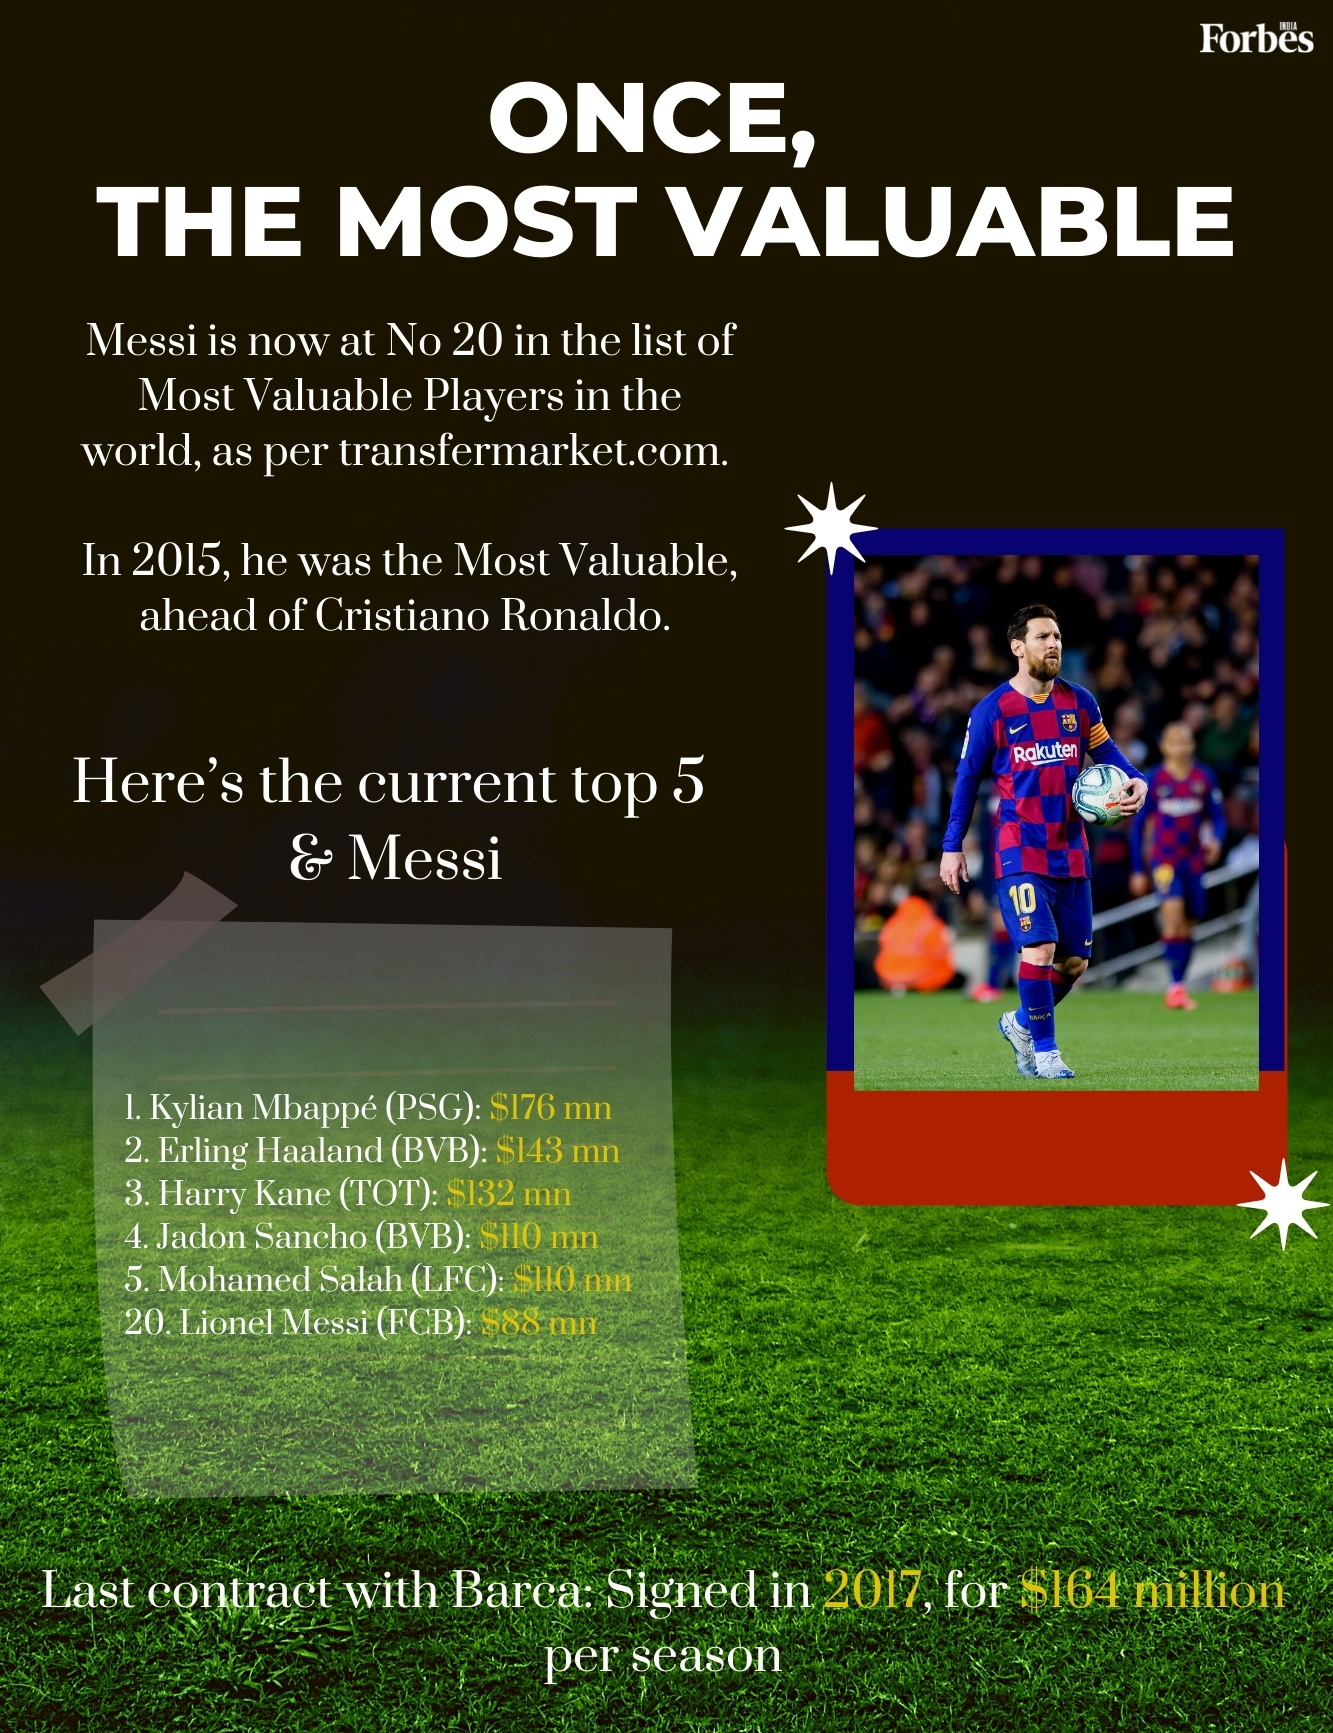 Lionel Messi in numbers—hits, misses, and silverware